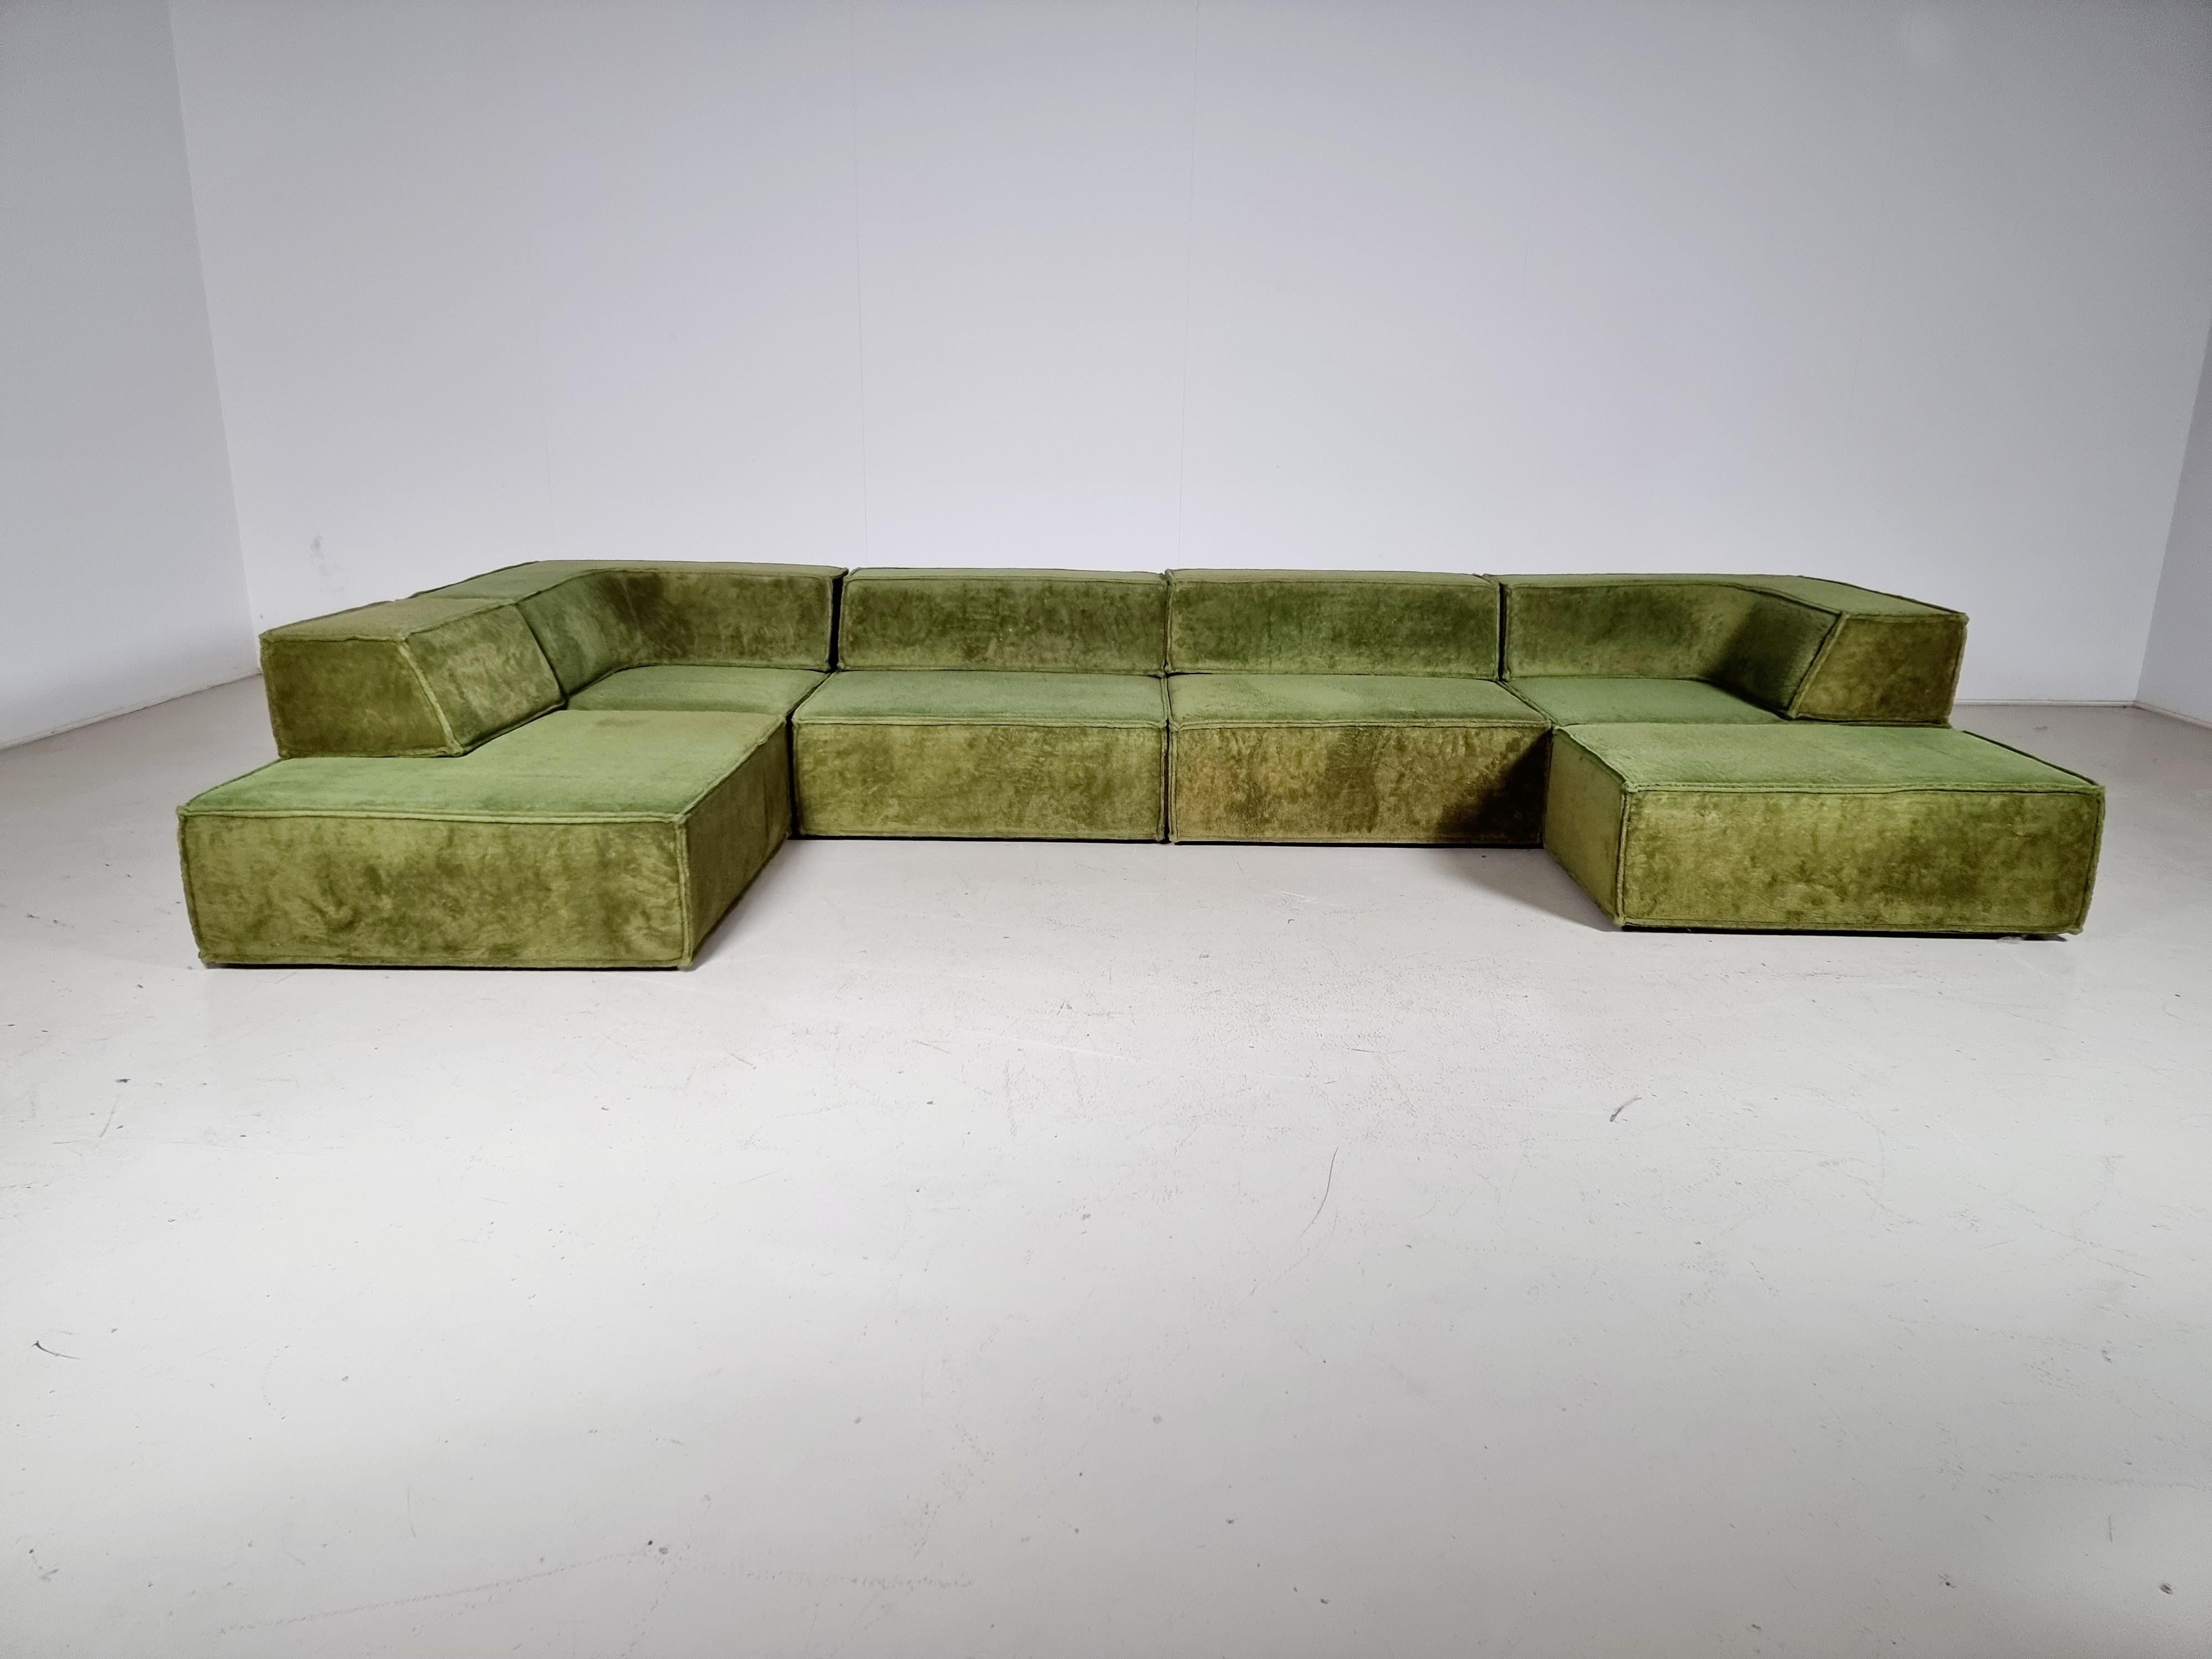 Very beautiful sofa landscape designed by the Swiss Designers Group named Form AG and produced in the 1970s by COR, Germany. Many different kinds of variations are possible because of the modular and adjustable system of the sofa. In its original